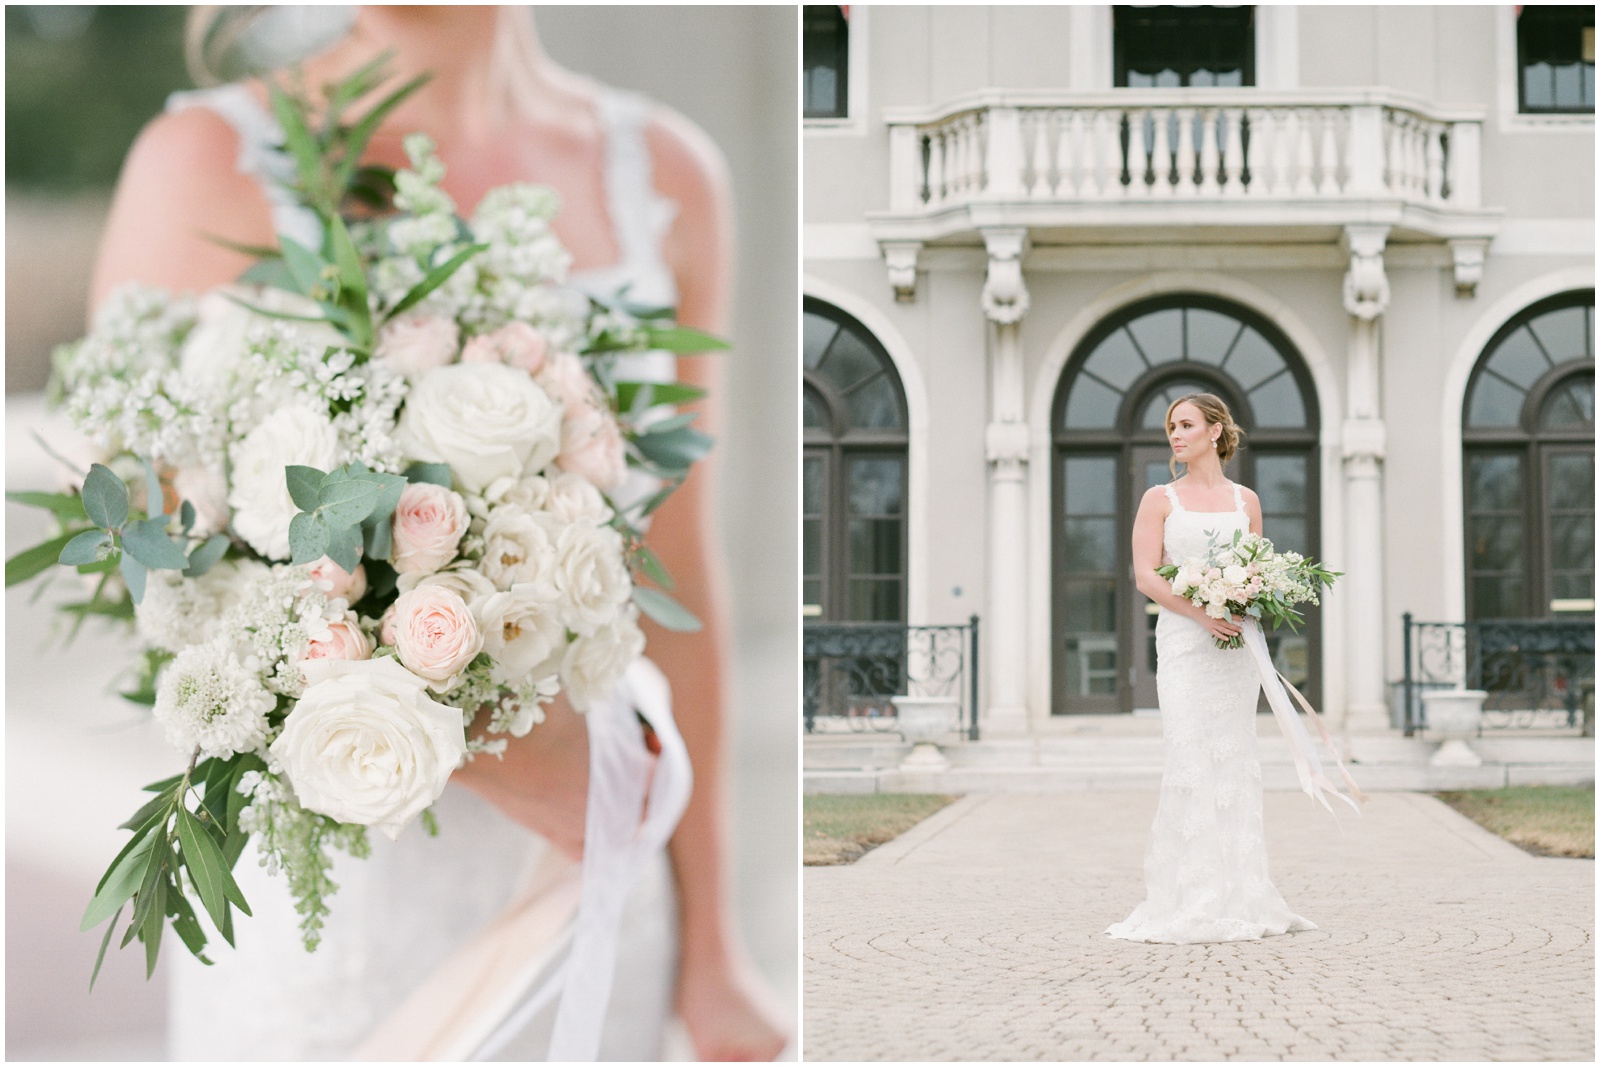 Romantic pink, white and green wedding bouquet